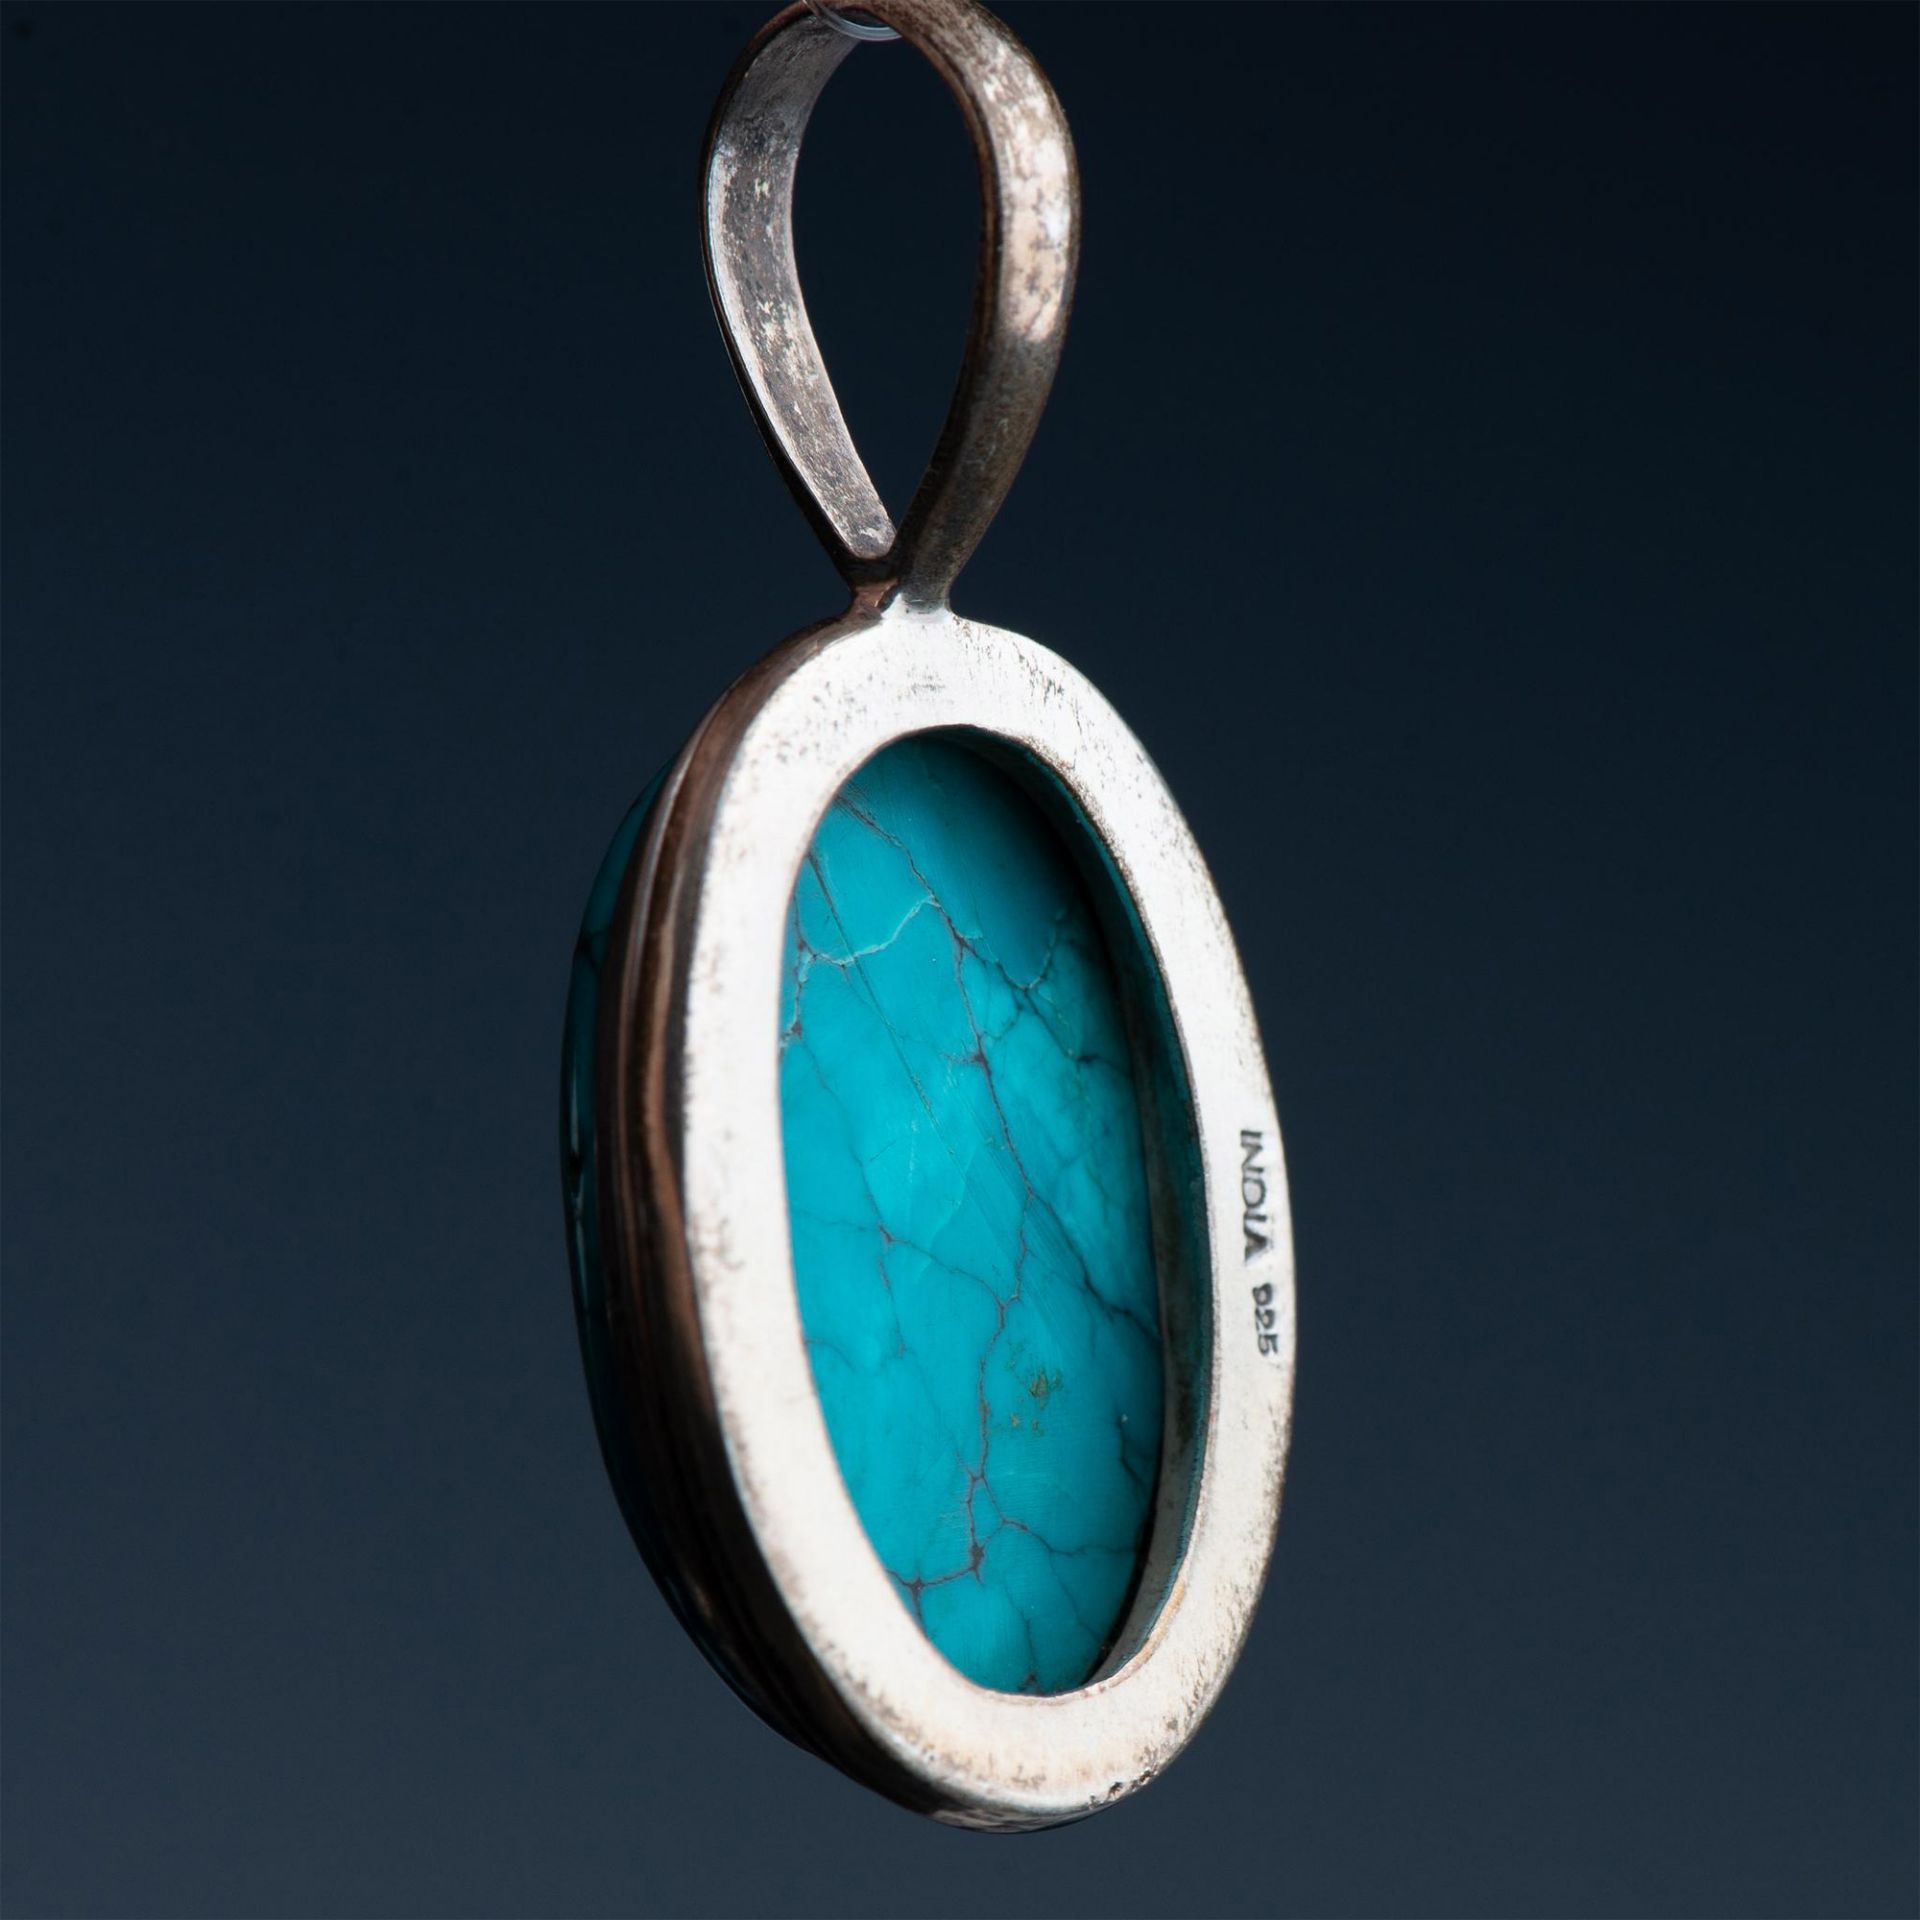 Large Oval Sterling Silver & Turquoise Pendant - Image 2 of 3